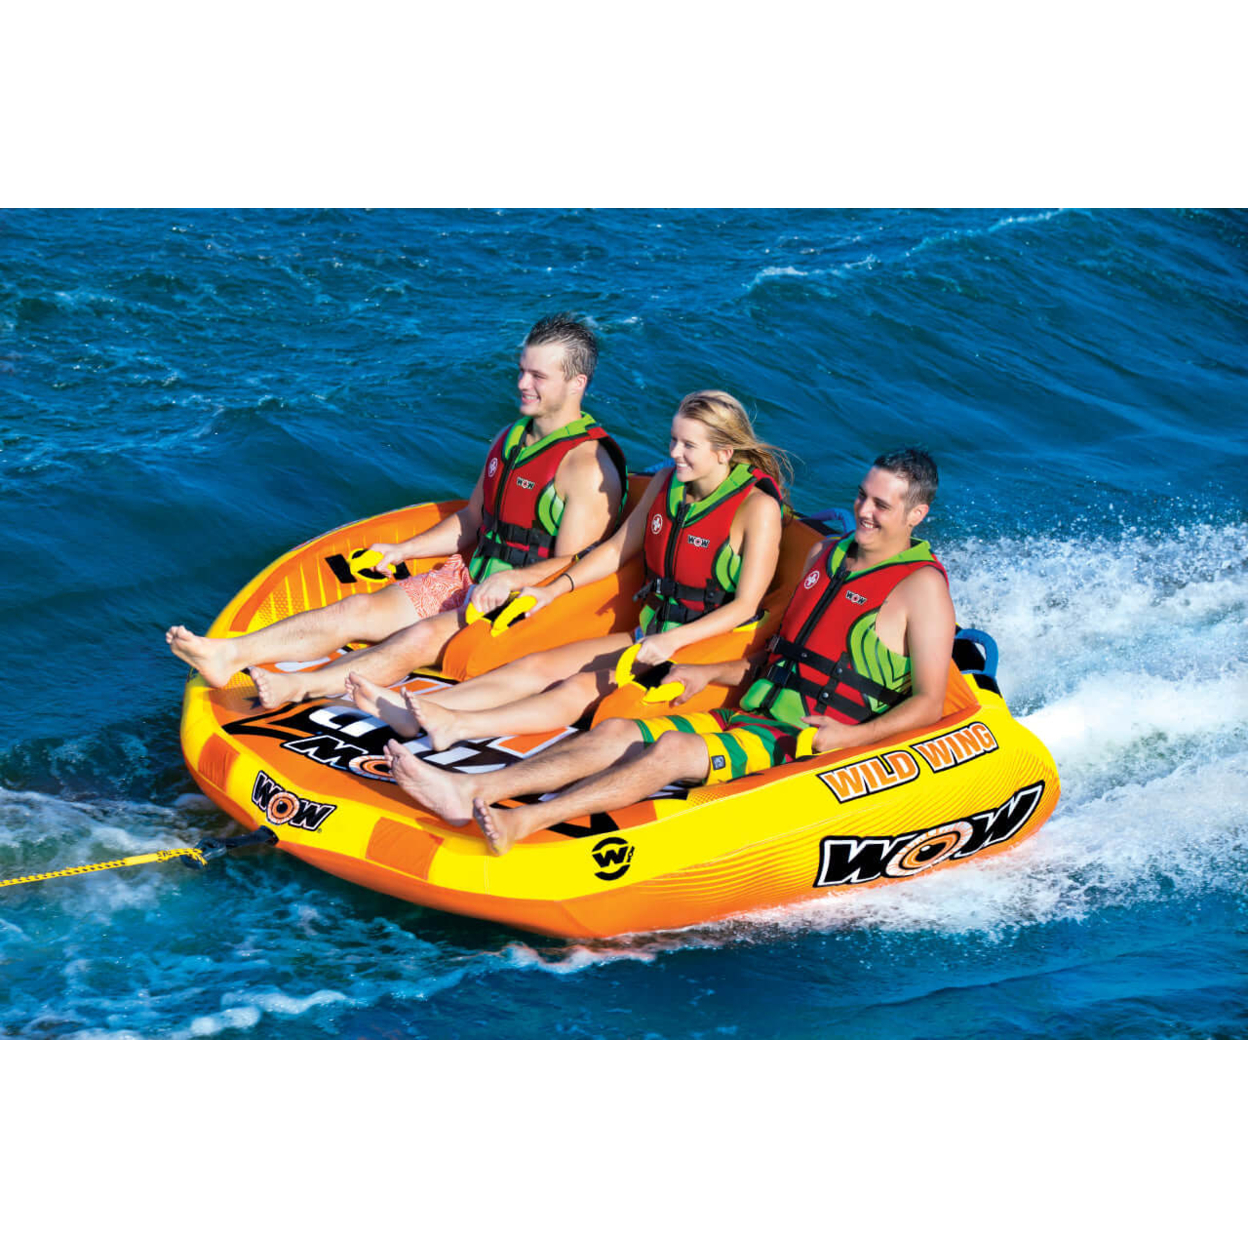 WOW Sports Wild Wing 3 Person Towable Water Tube For Pool And Lake (18-1130)